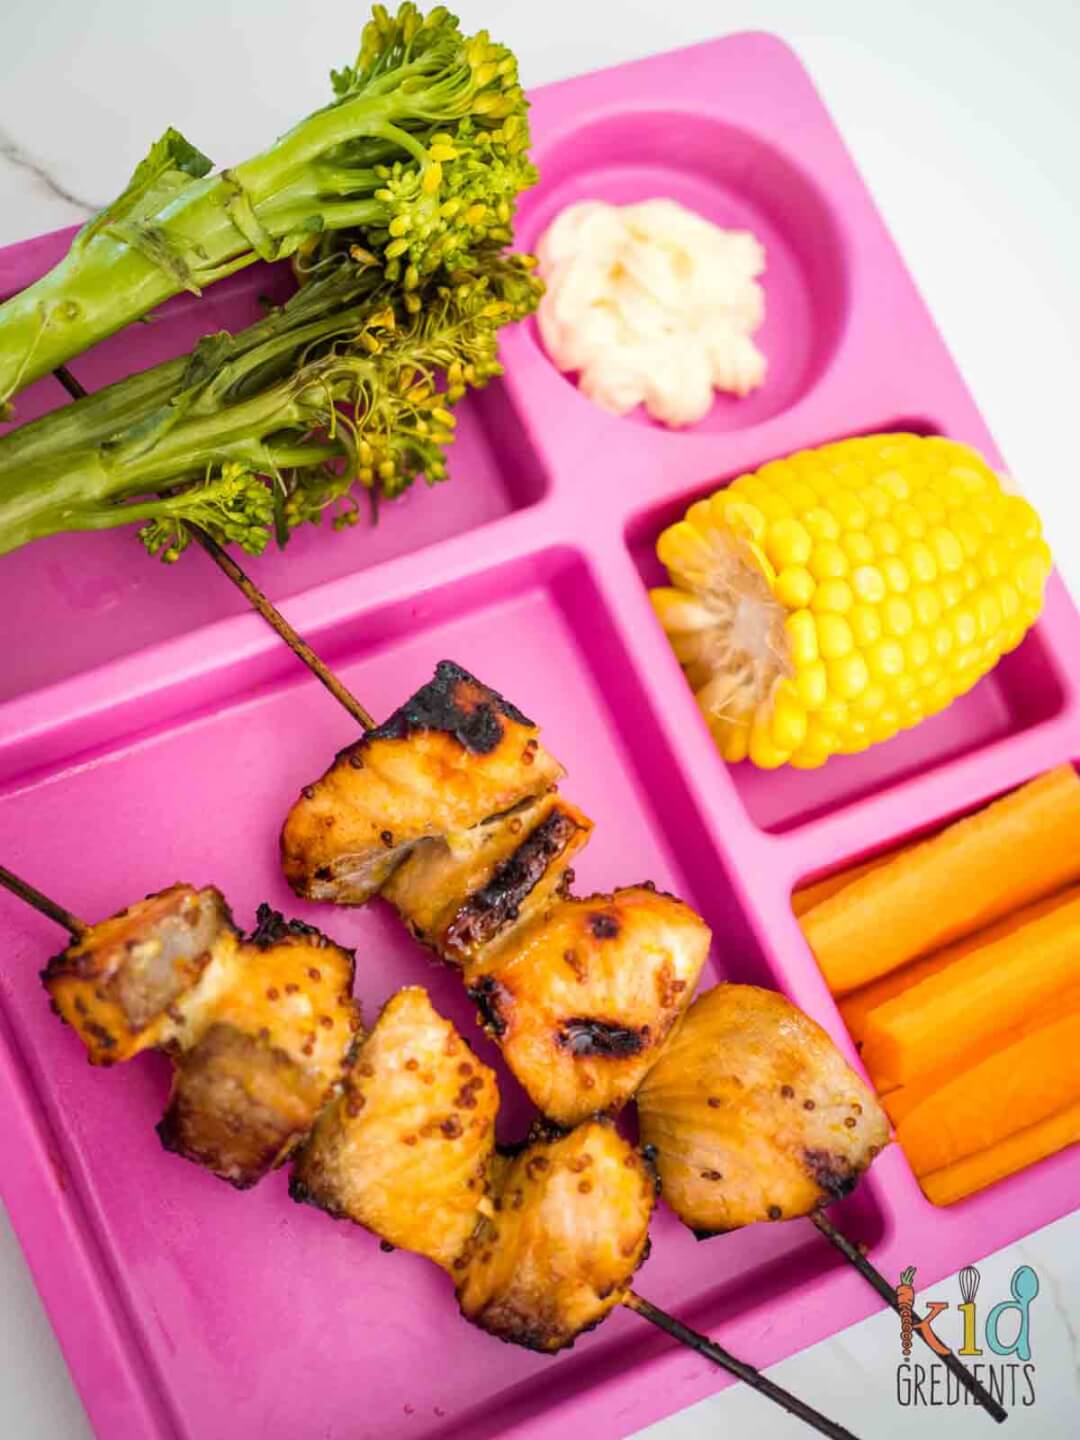 Salmon skewers with Orange Honey Mustard Glaze on a plate with broccoli, corn and carrots